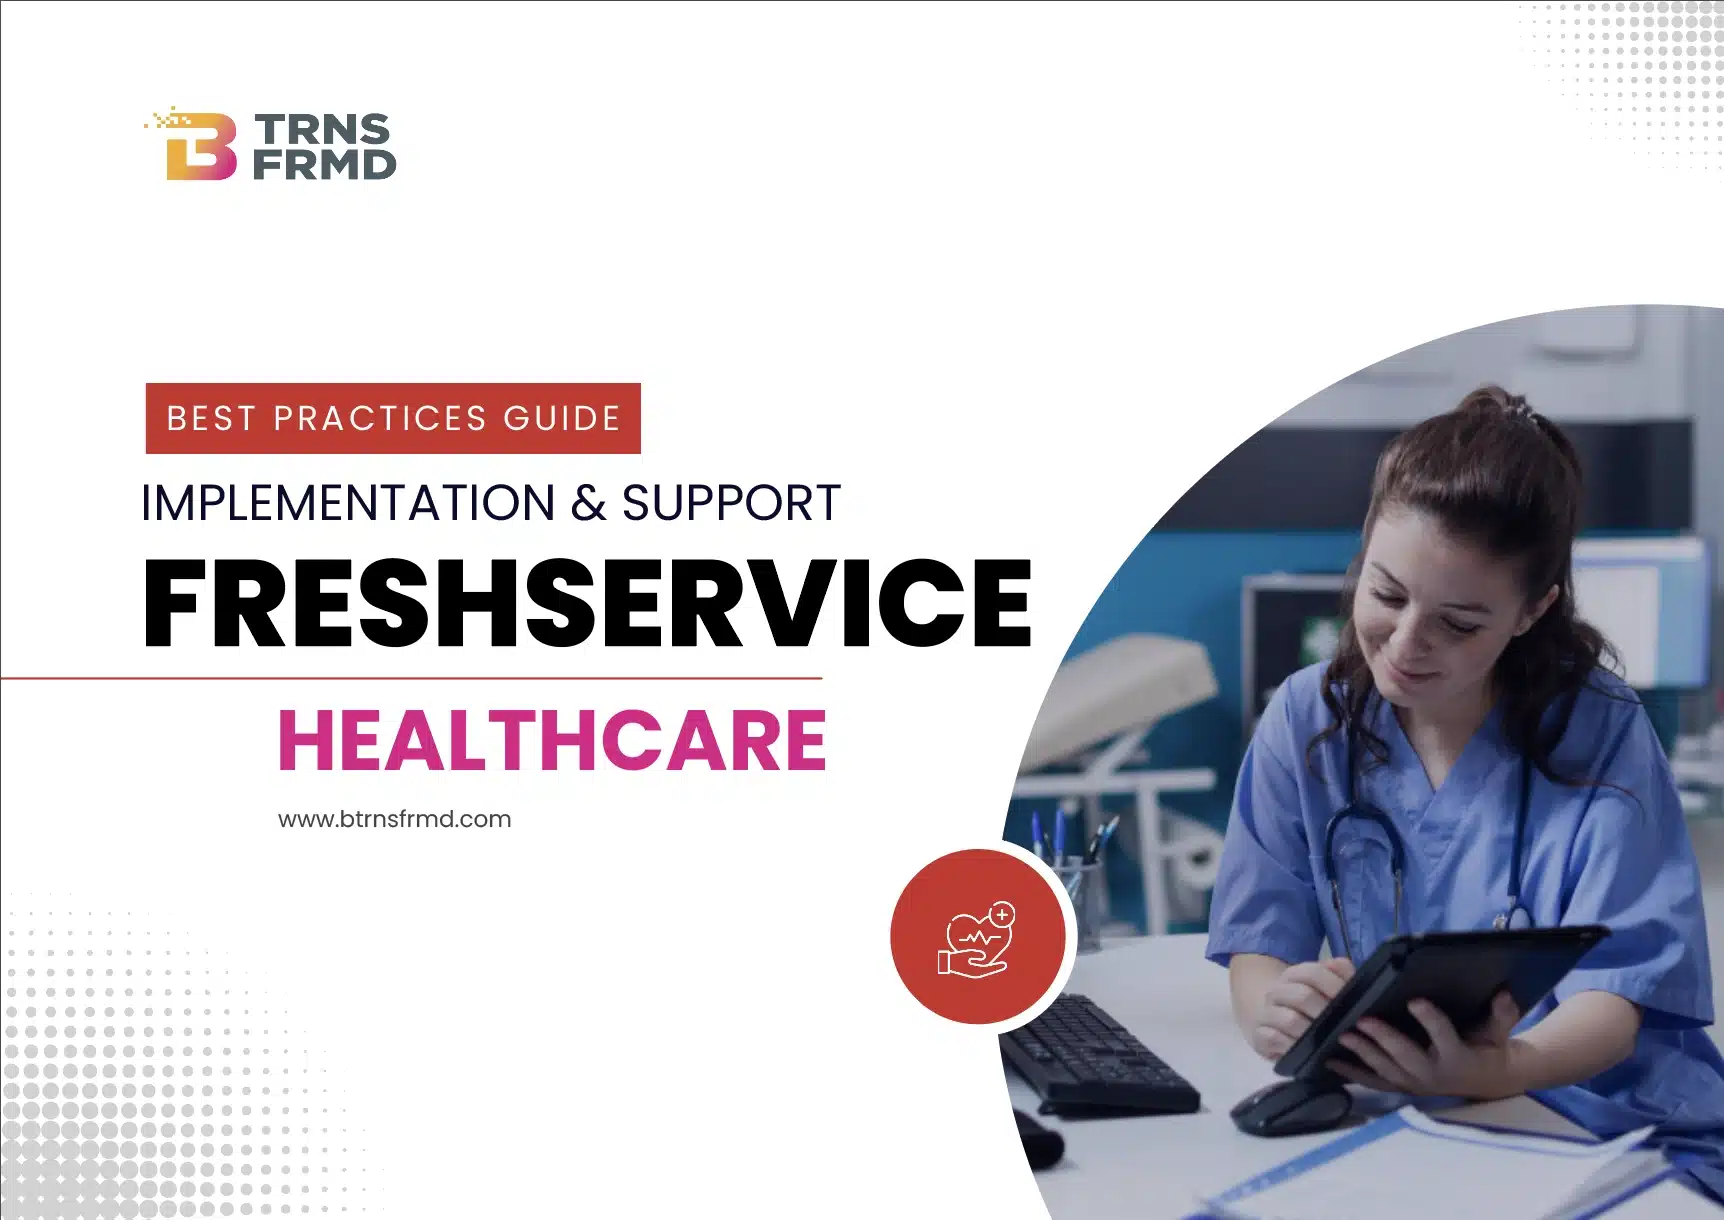 Freshservice Healthcare Guide Featured Image